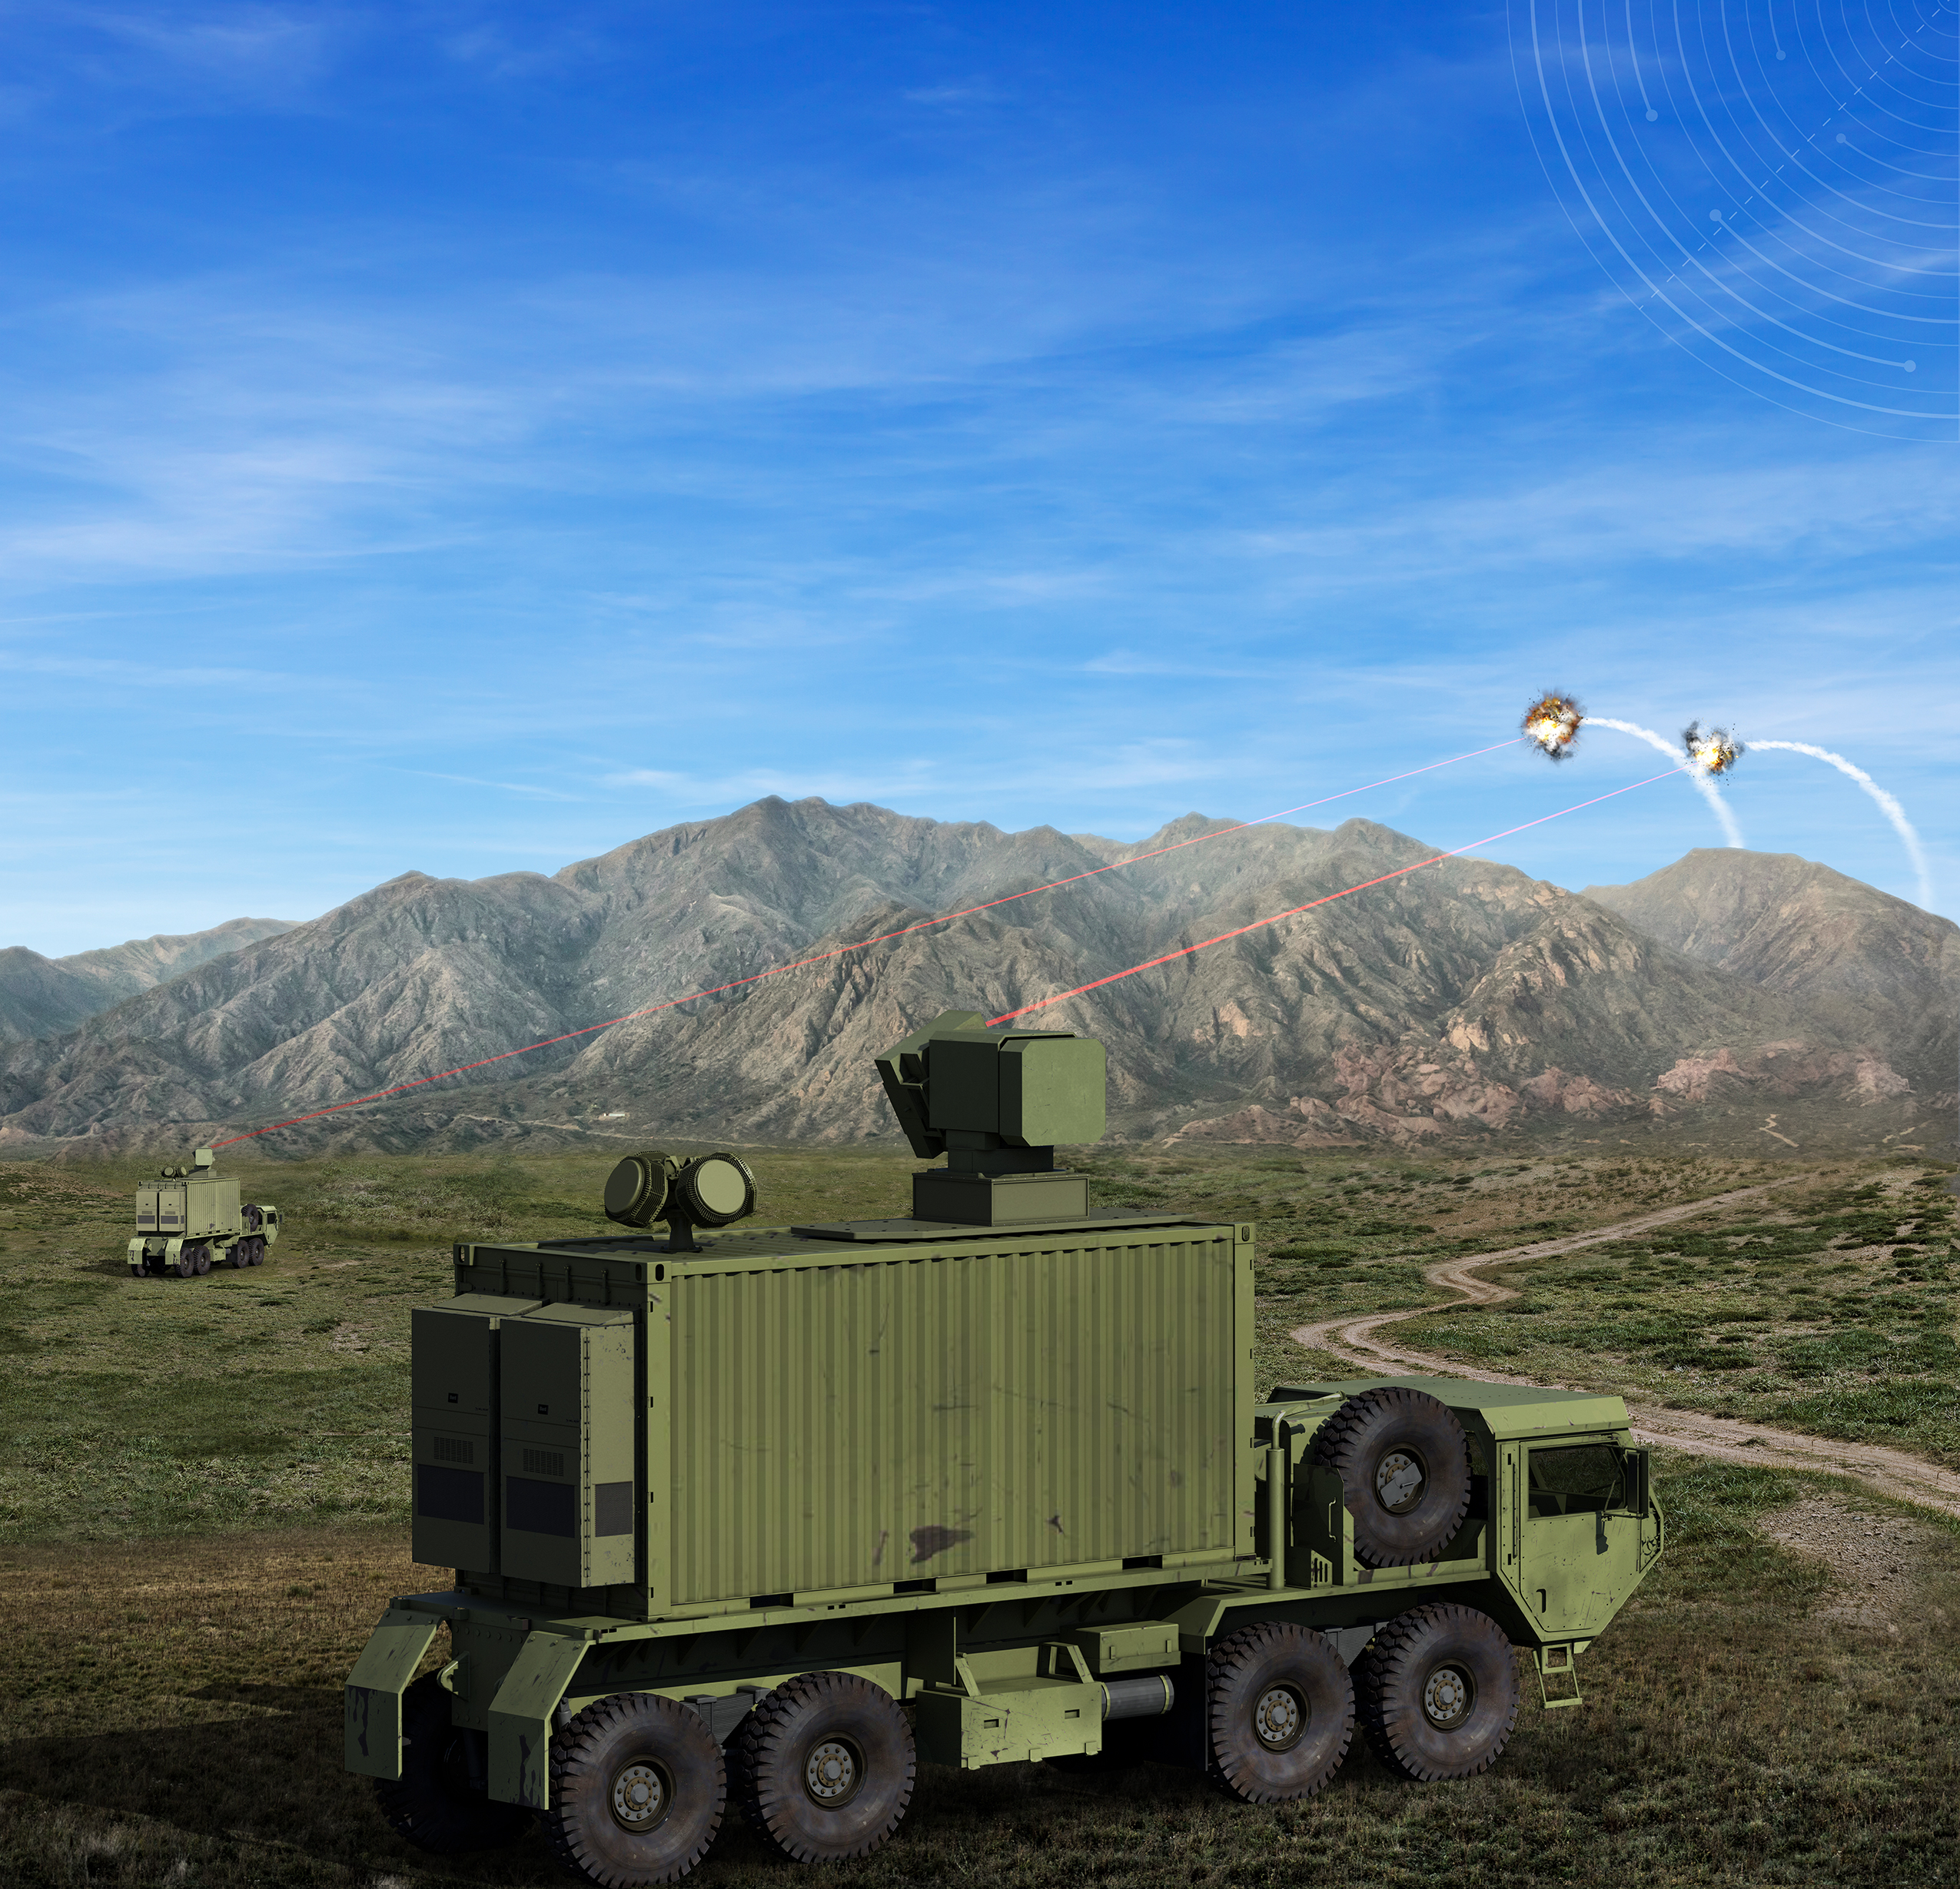 General Atomics and Boeing Win Contract For 300kW Army Laser